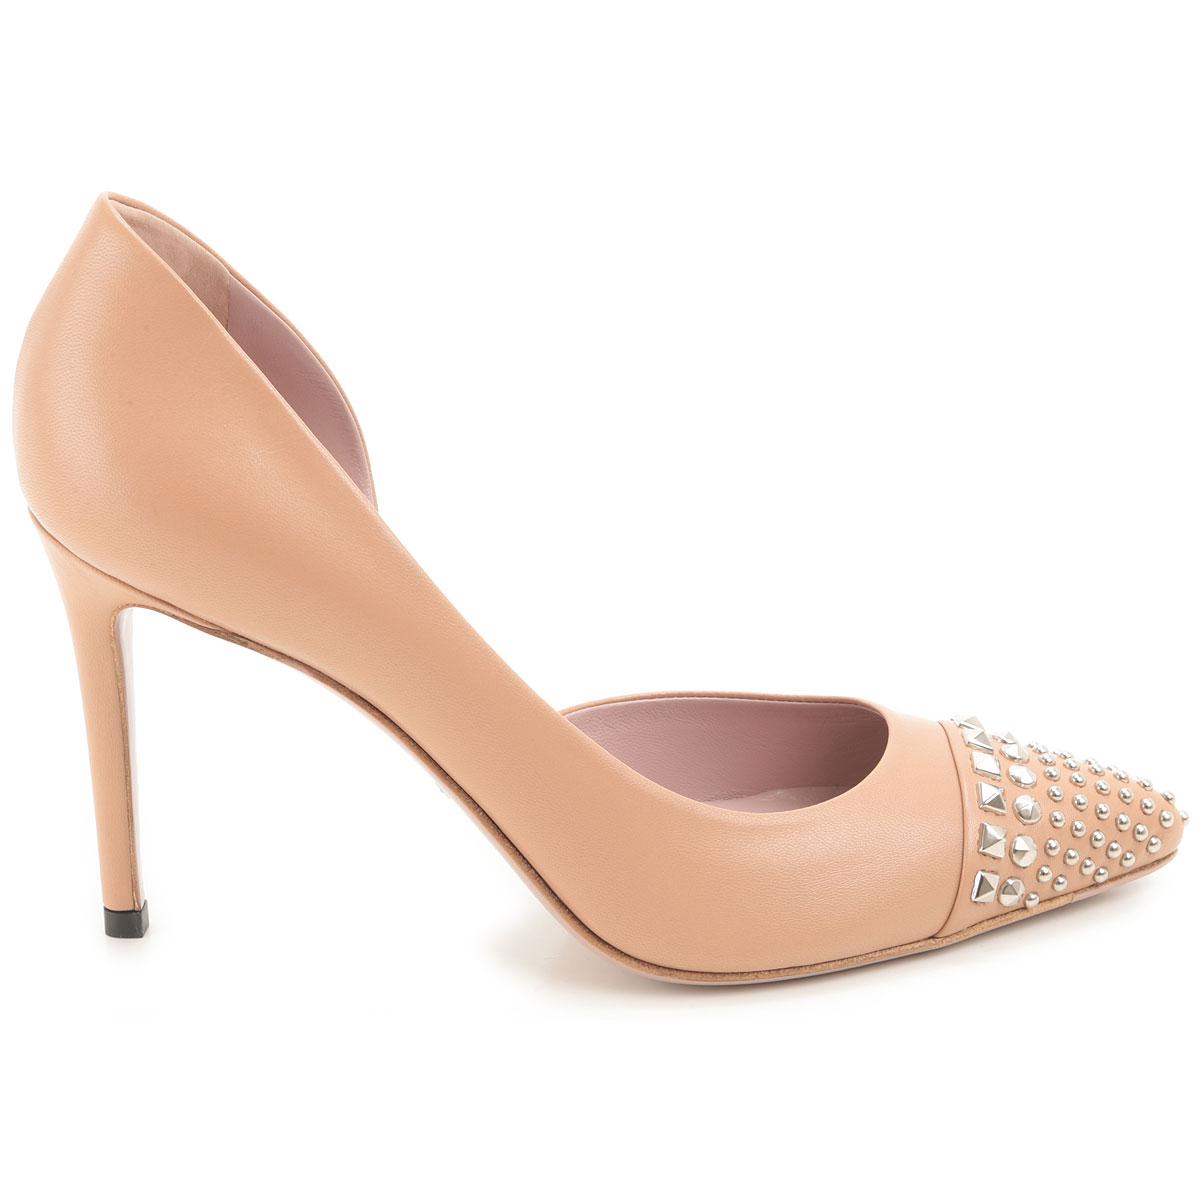 Gucci Pumps & High Heels For Women On Sale In Outlet in Pink - Lyst